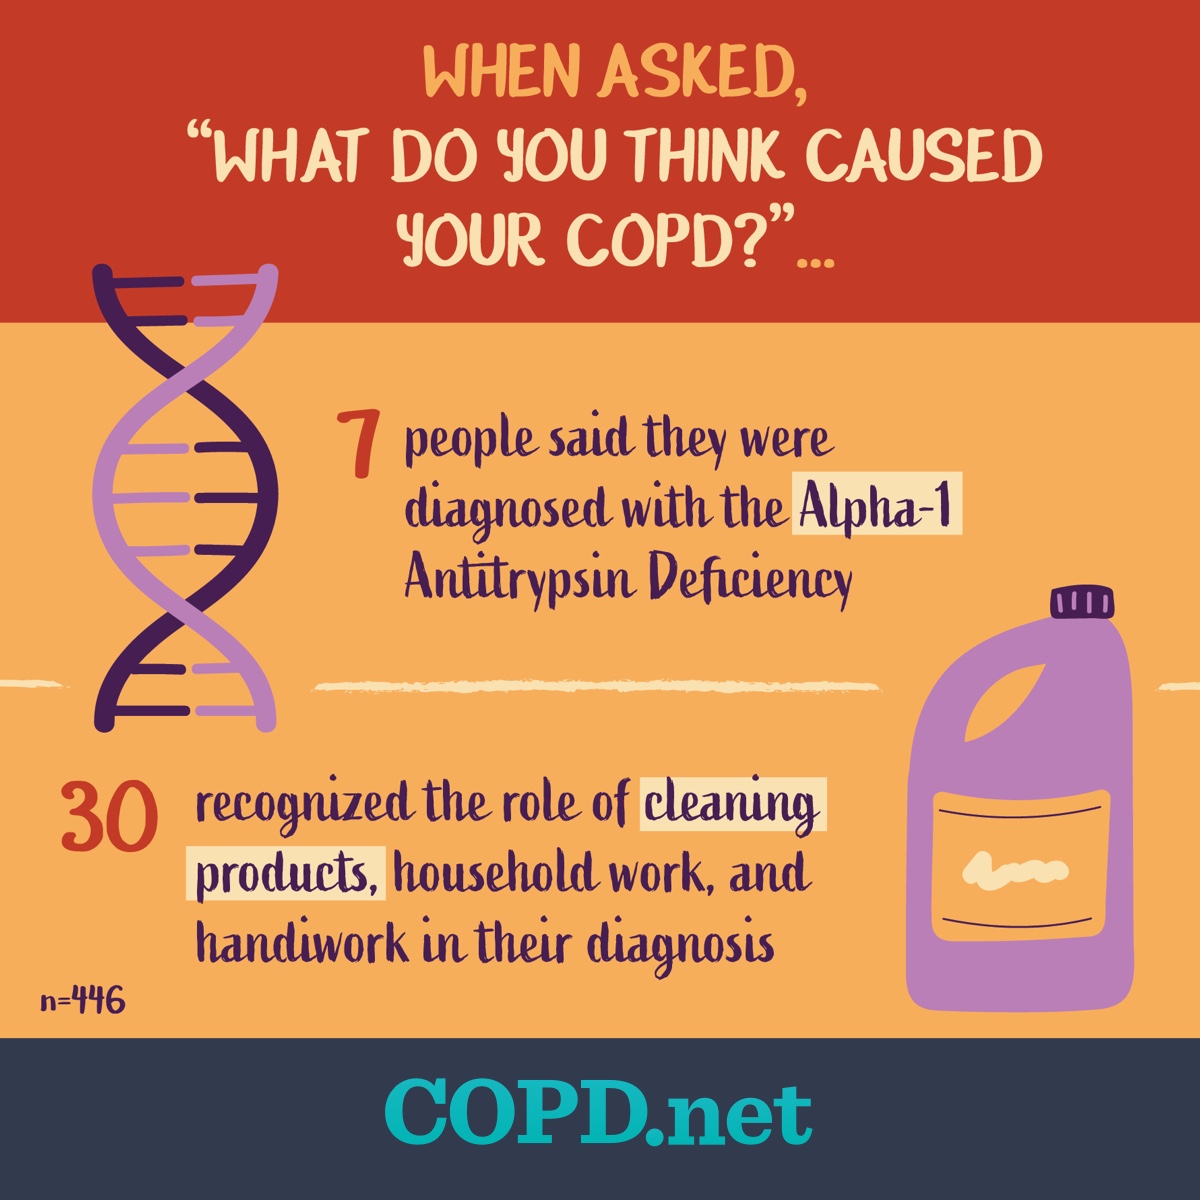 7 people referenced Alpha-1 and 30 mentioned cleaning products and household work when talking about what they think caused their COPD